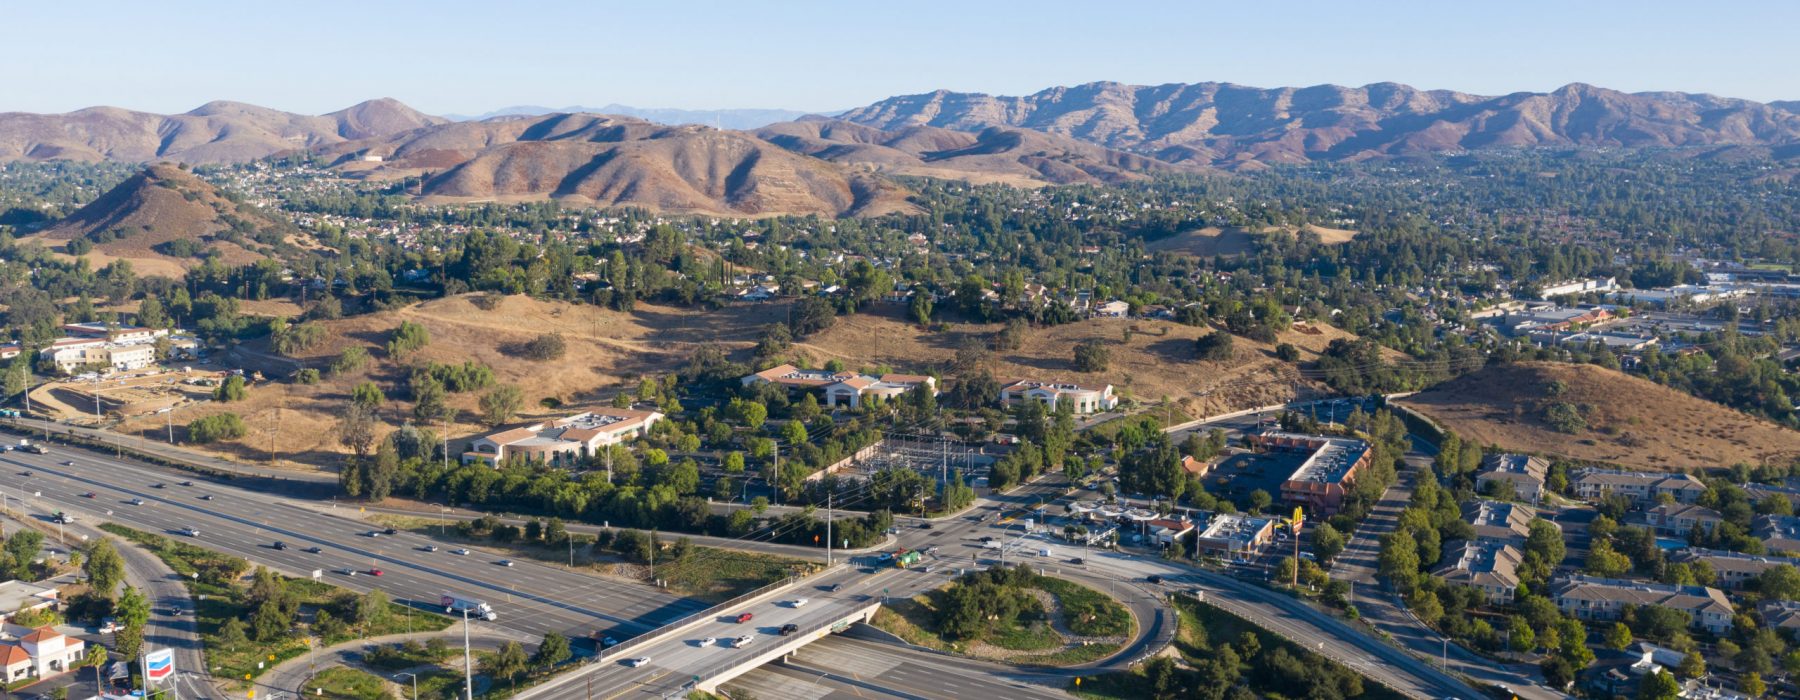 A view of the freeway from above.